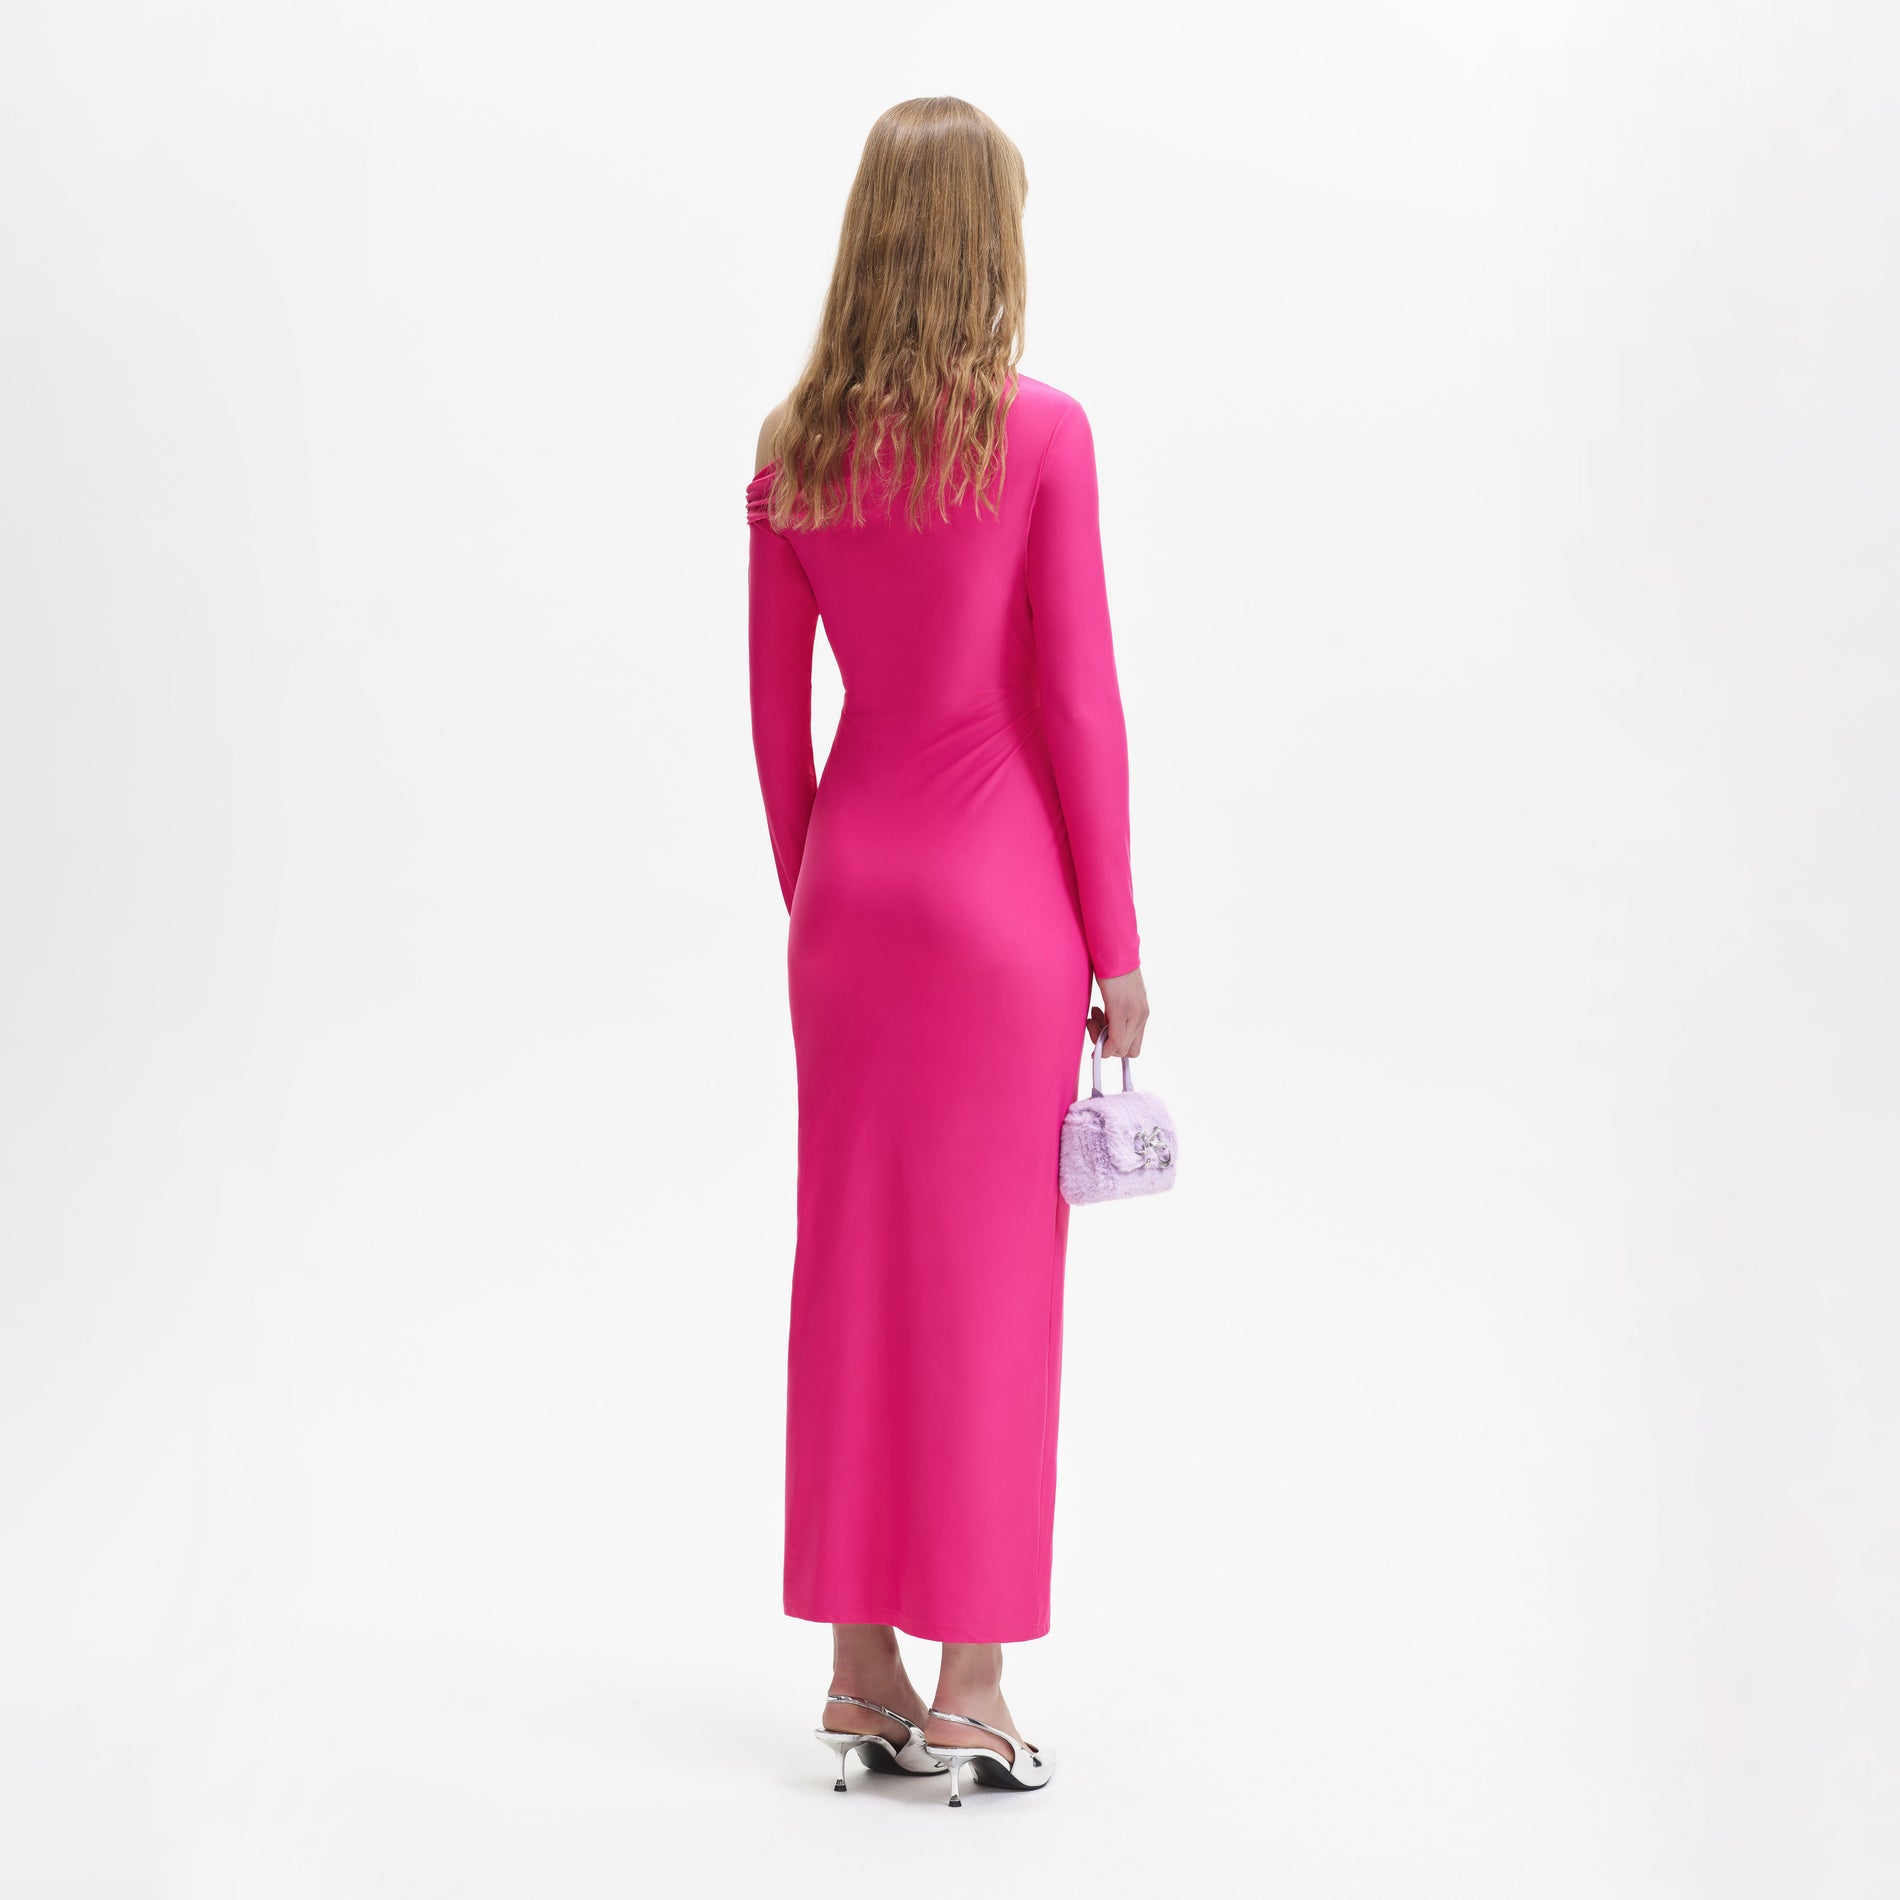 A woman wearing the Pink Jersey Cut Out Maxi Dress